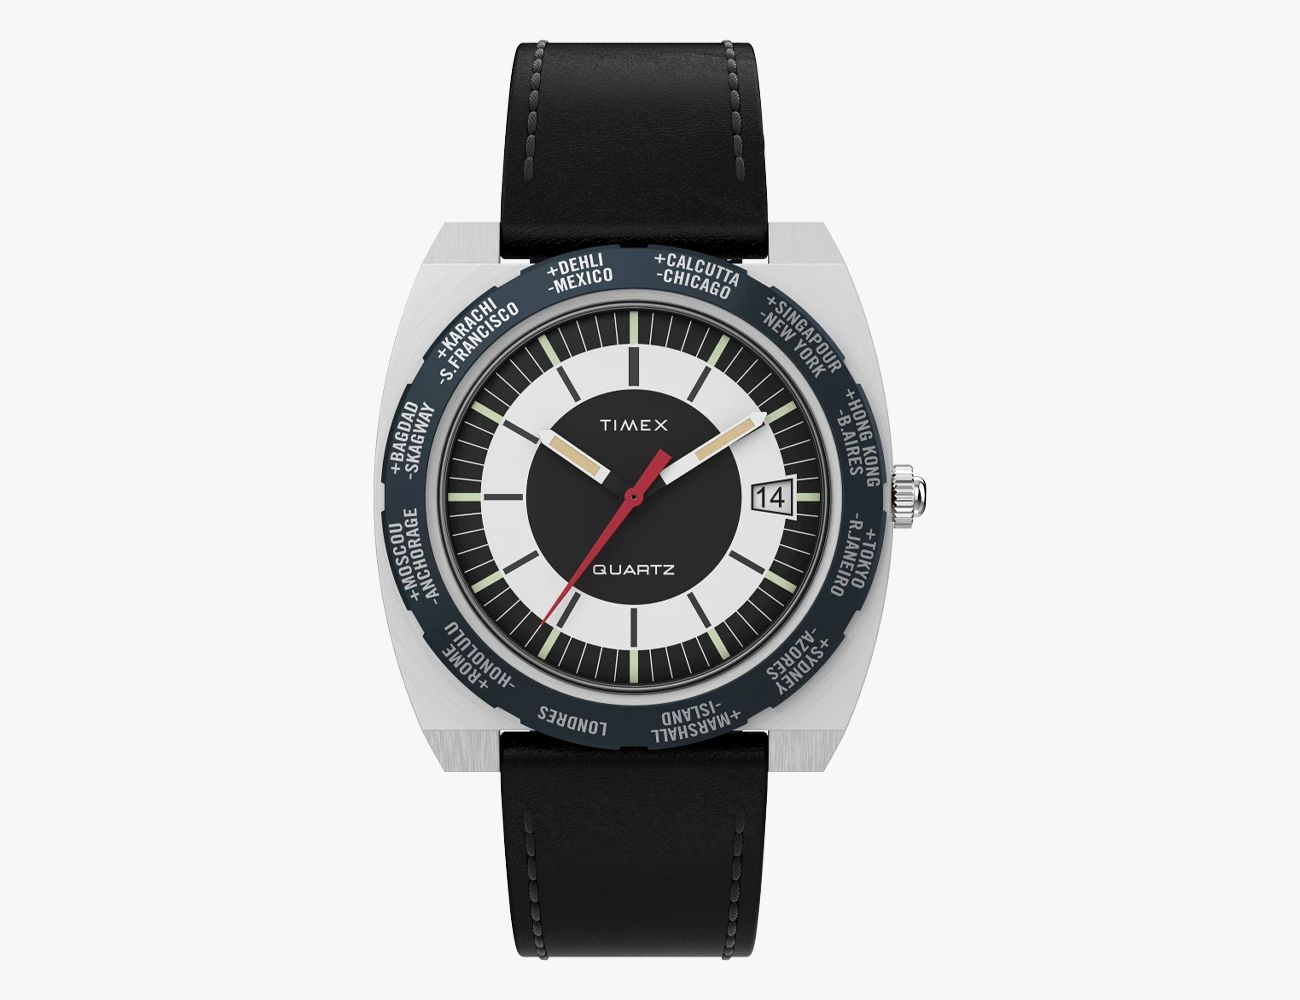 Louis Vuitton Gives the Diver Watch a High-Fashion Makeover